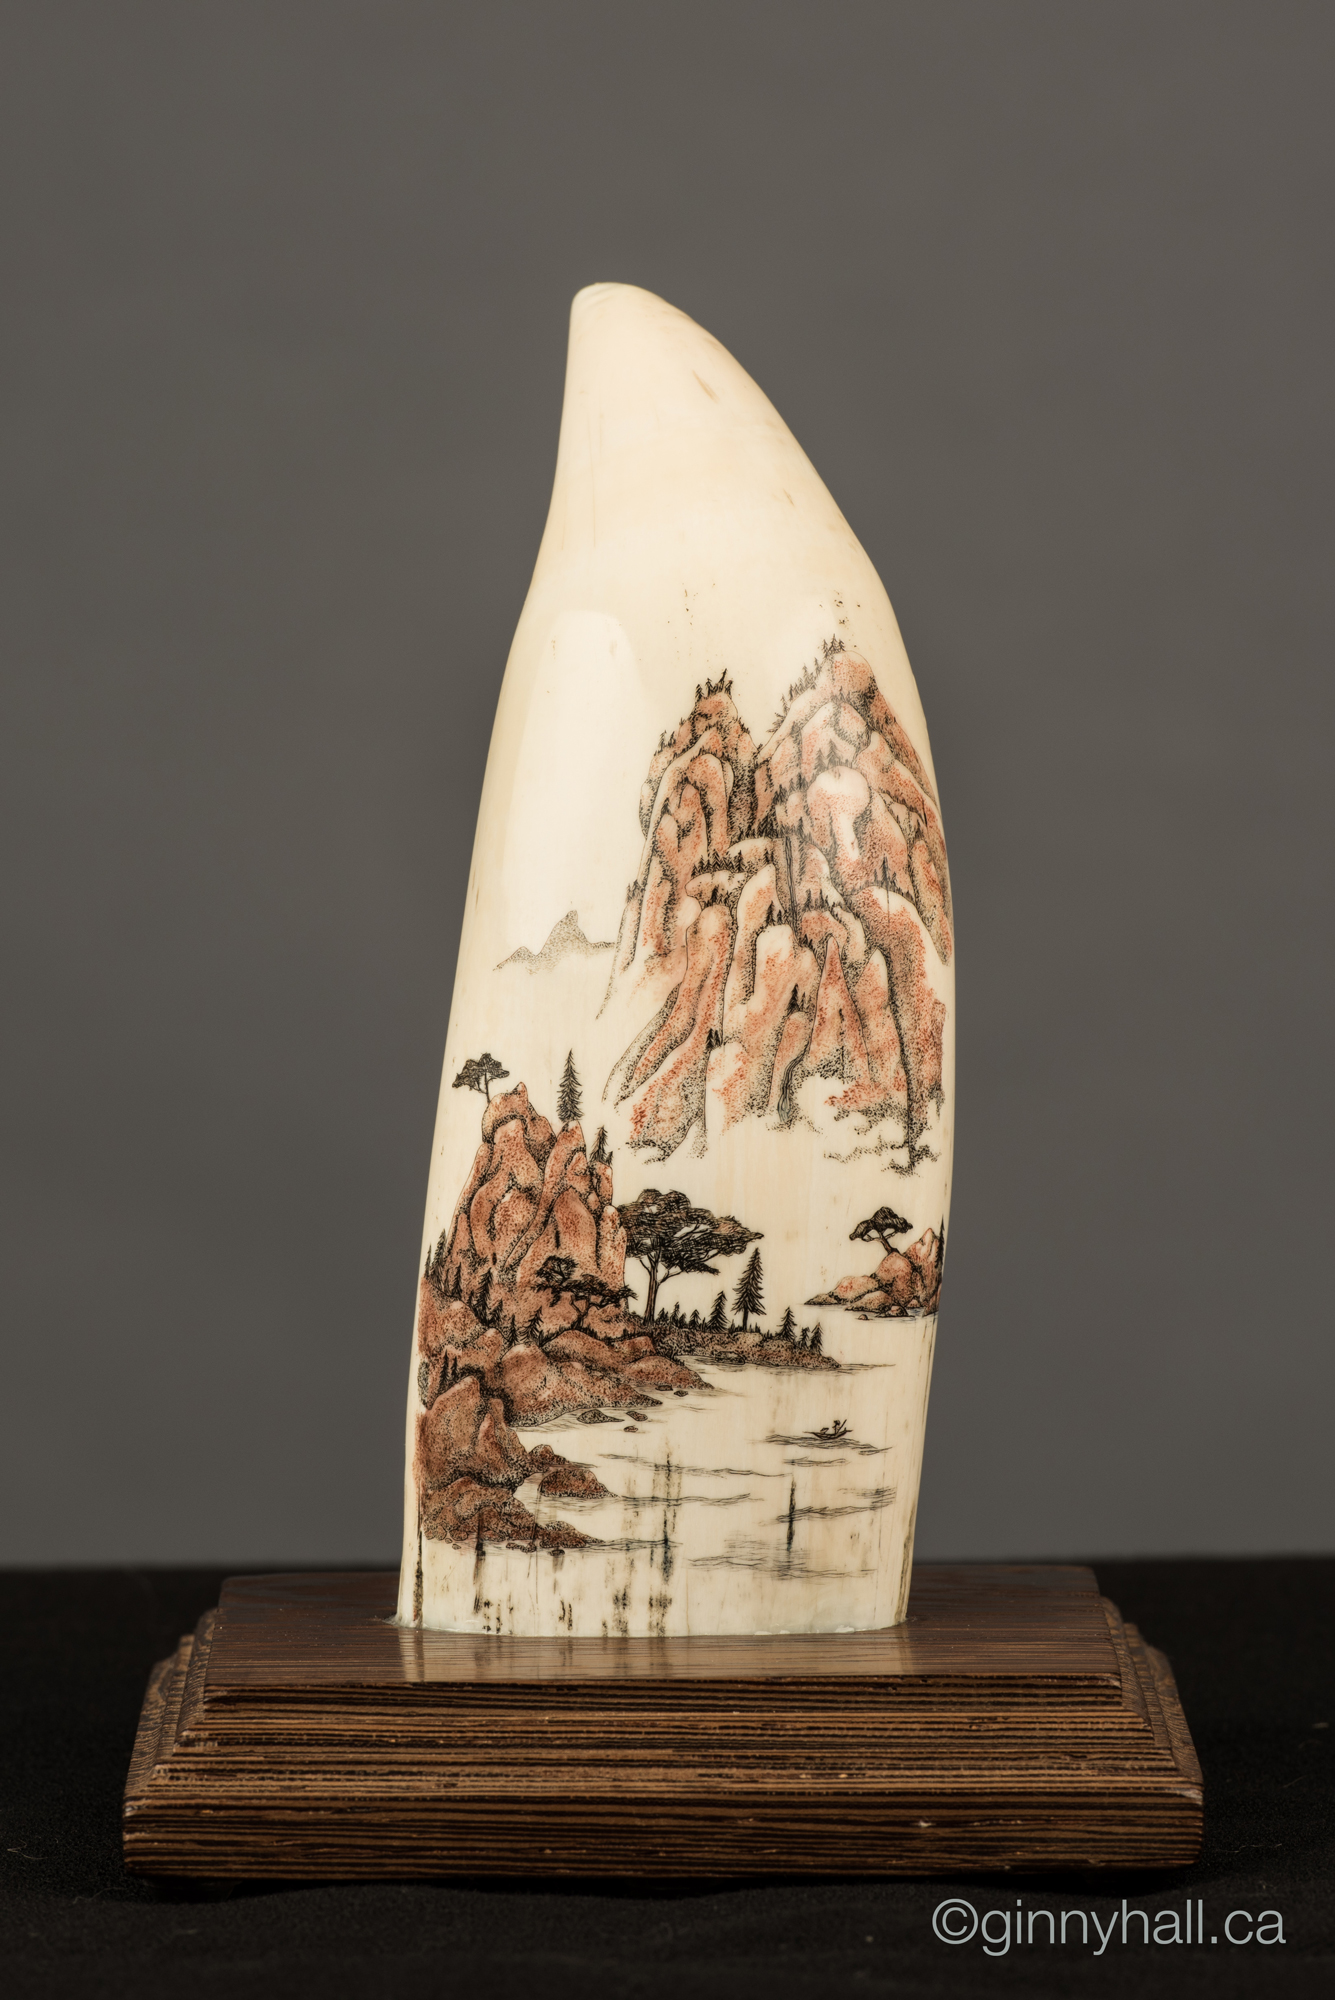 A scrimshaw peice by Ginny Hall depicting a nature scene.